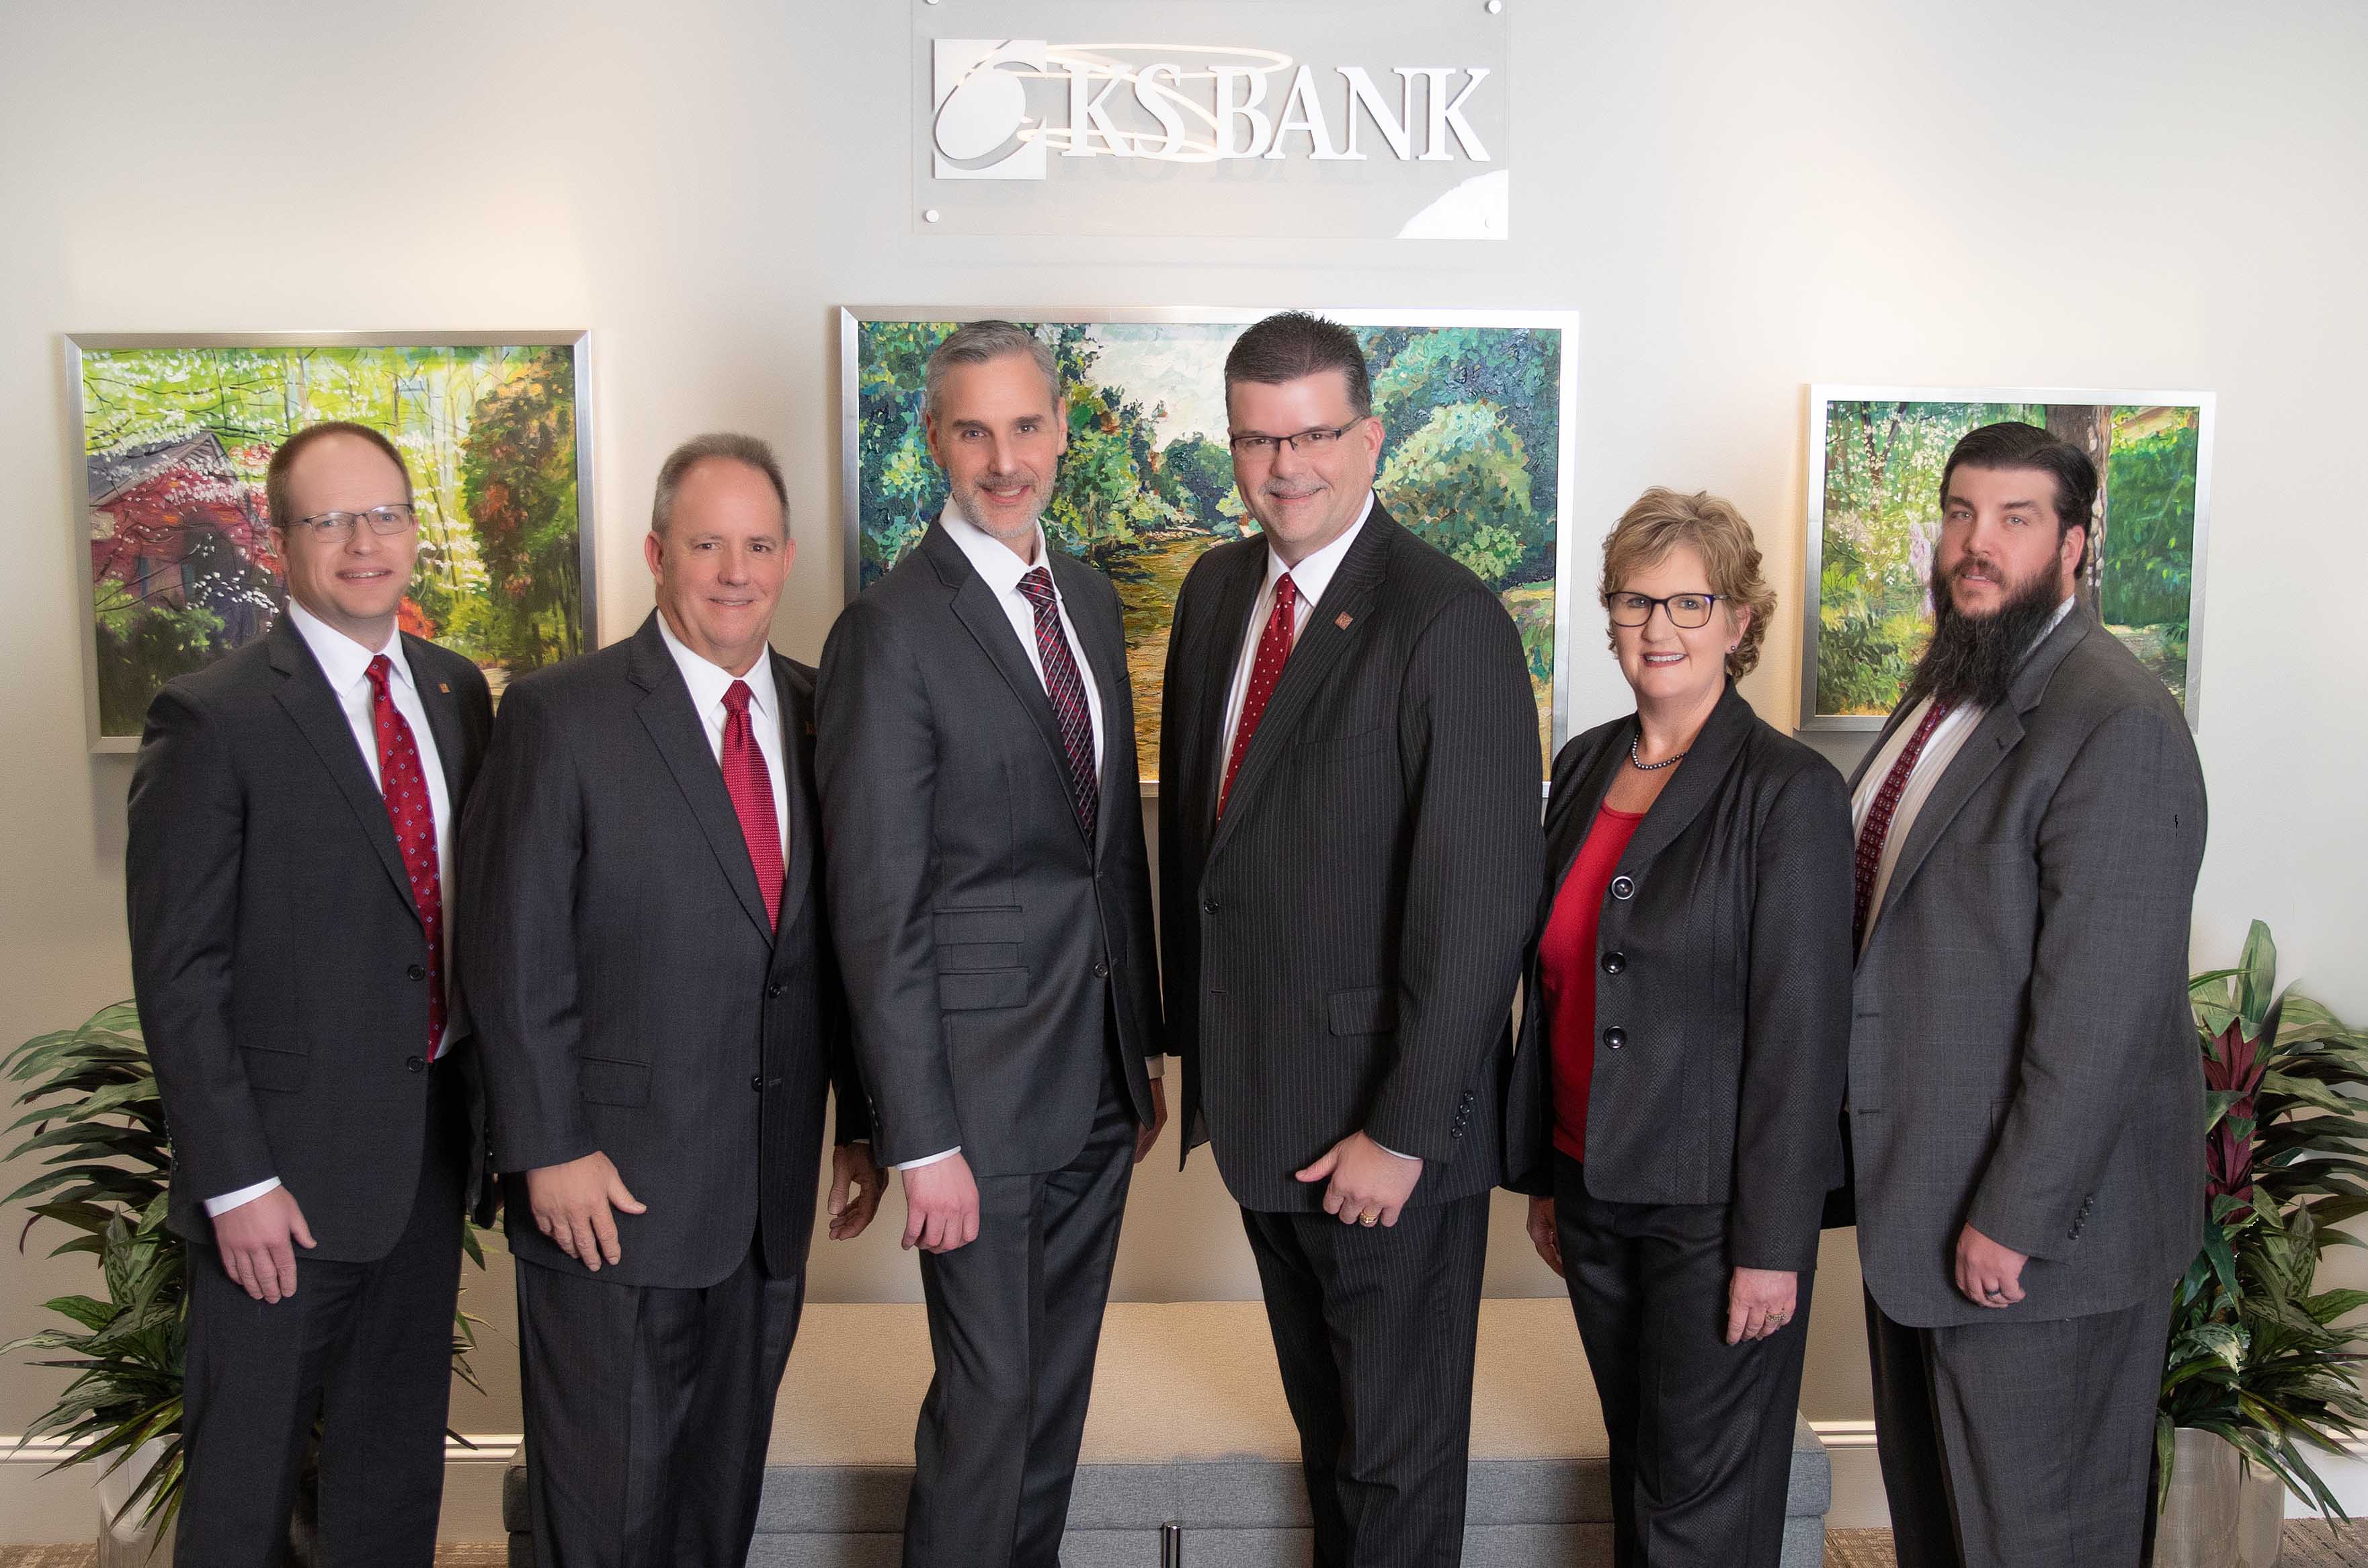 KS Bank executive team (5 men and 1 woman) standing in a line smiling at the camera.